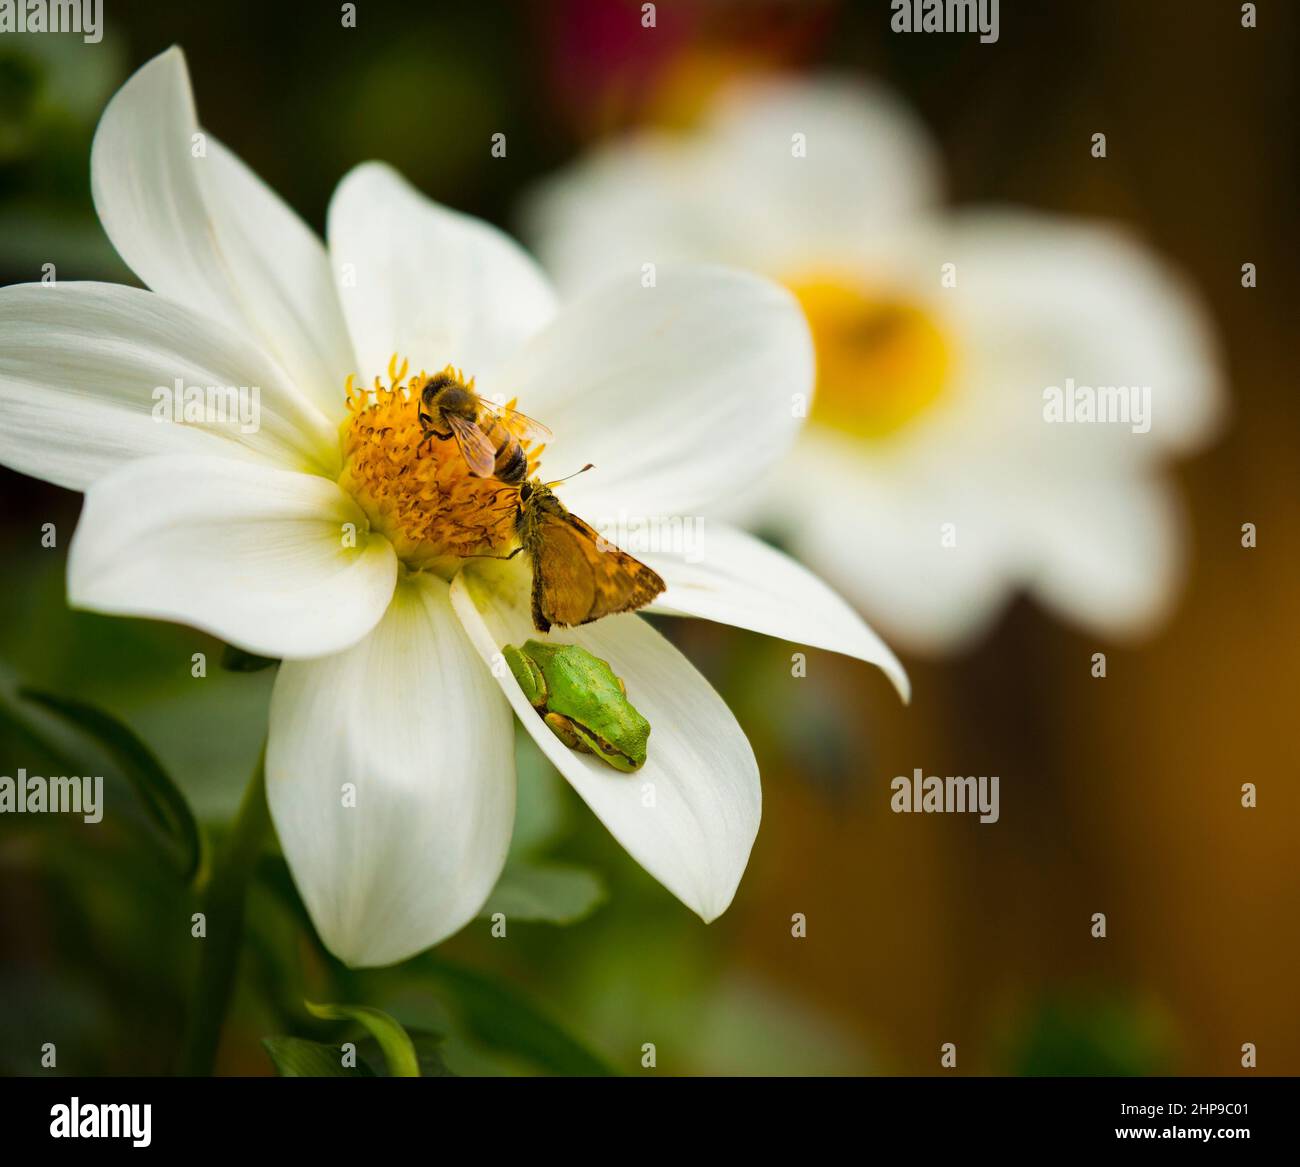 Closeup of a honeybee, butterfly and green tree frog all on one white flower in summer Stock Photo